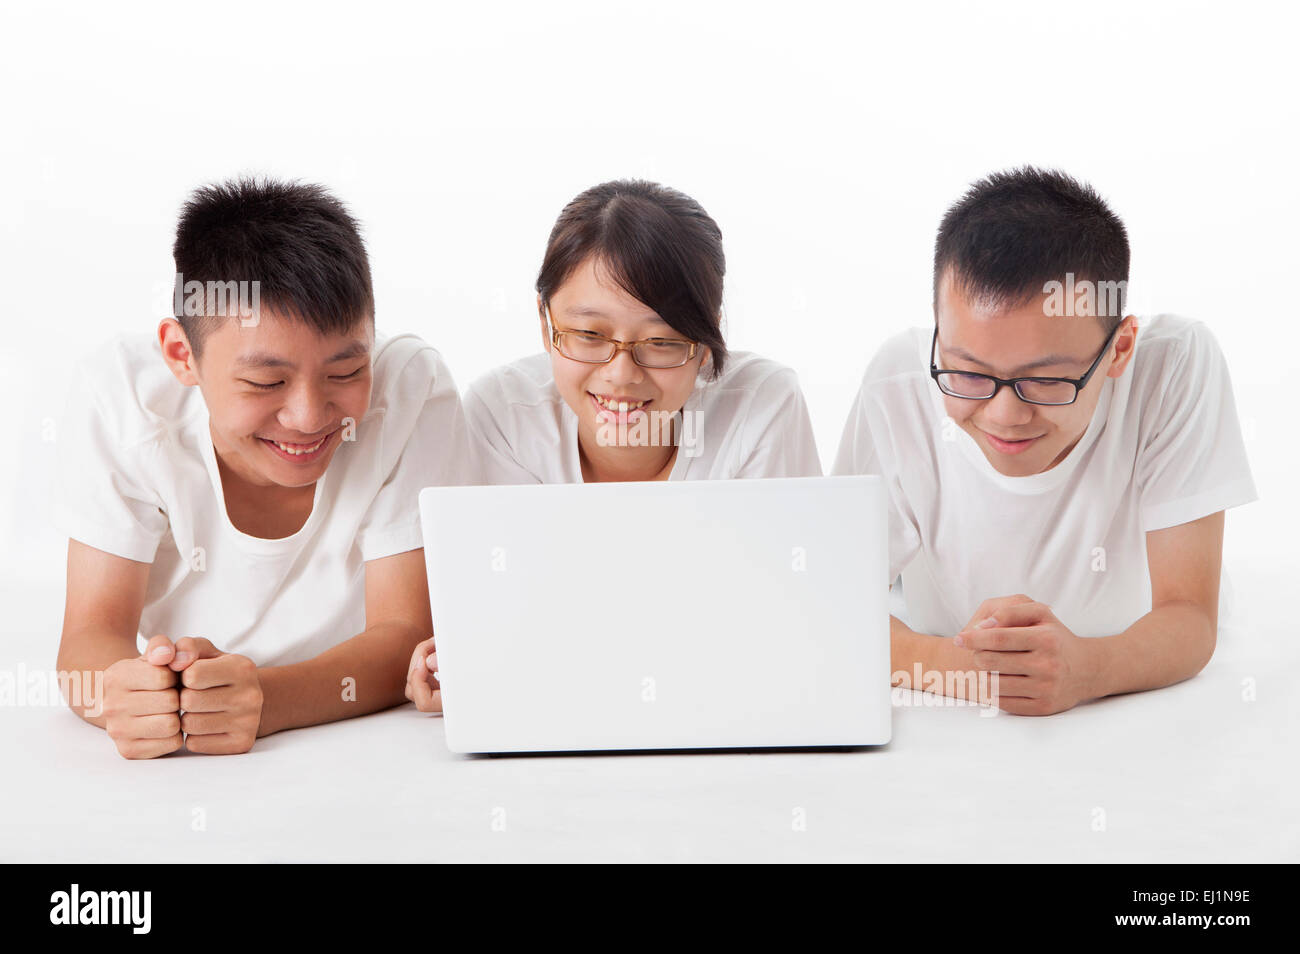 Teenagers lying on front and looking at the laptop together Stock Photo